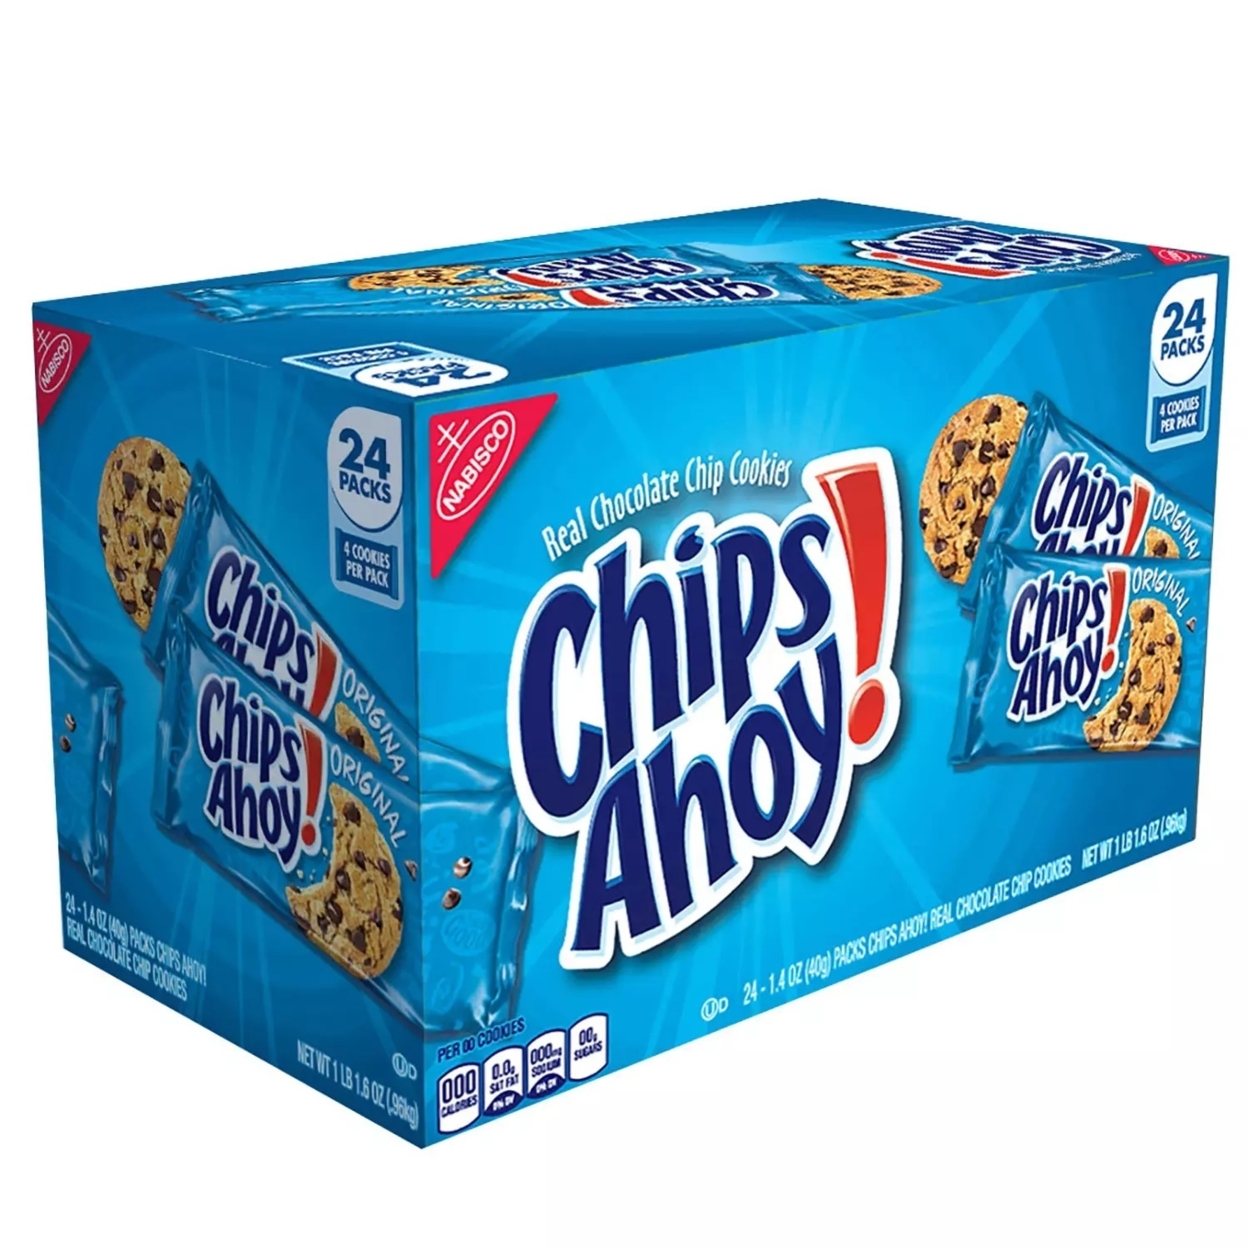 Chips Ahoy! Chocolate Chip Cookies (24 Snack Packs)